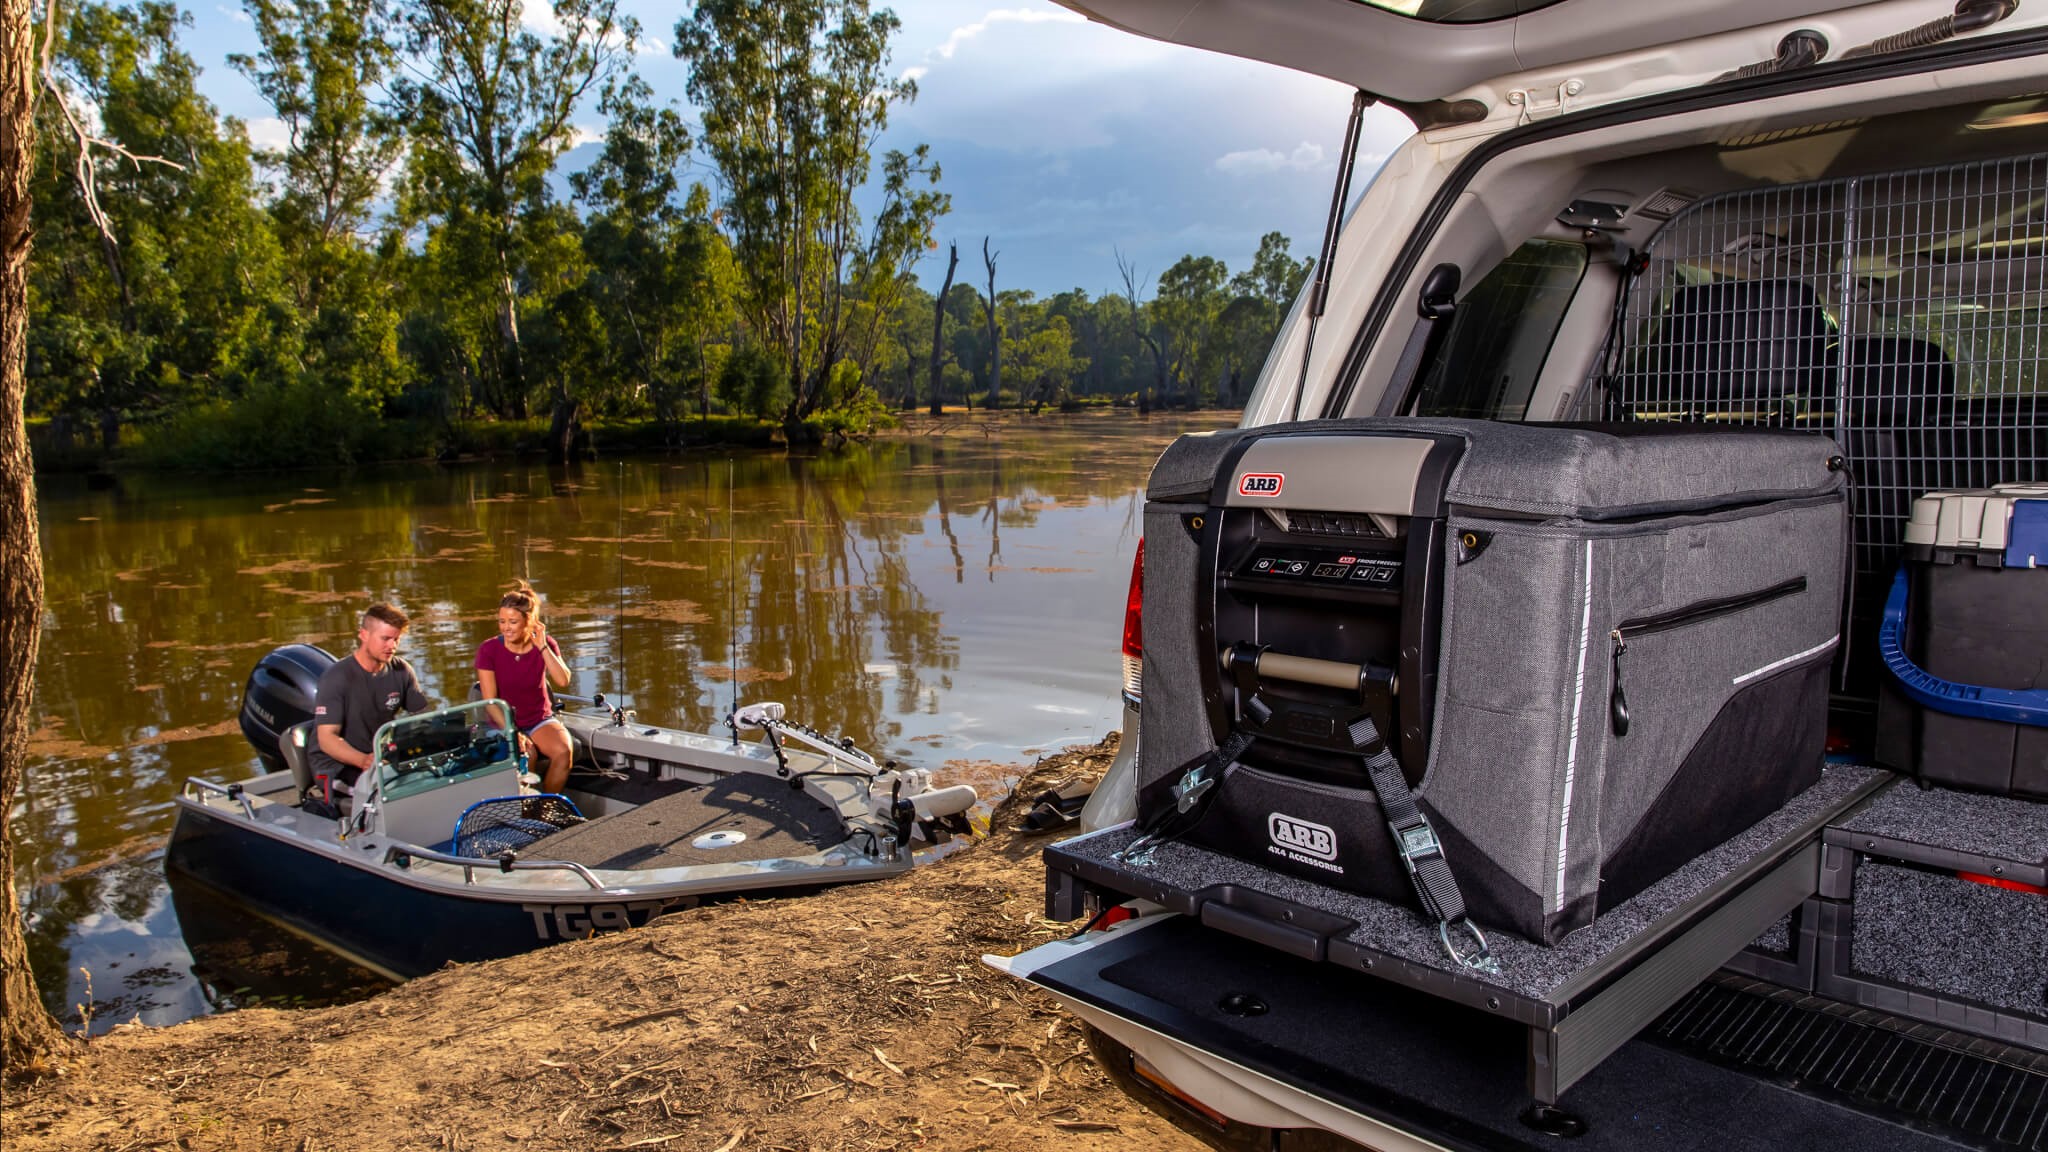 Top 7 Best Camping Fridges That Are Small in Size but Work Perfectly